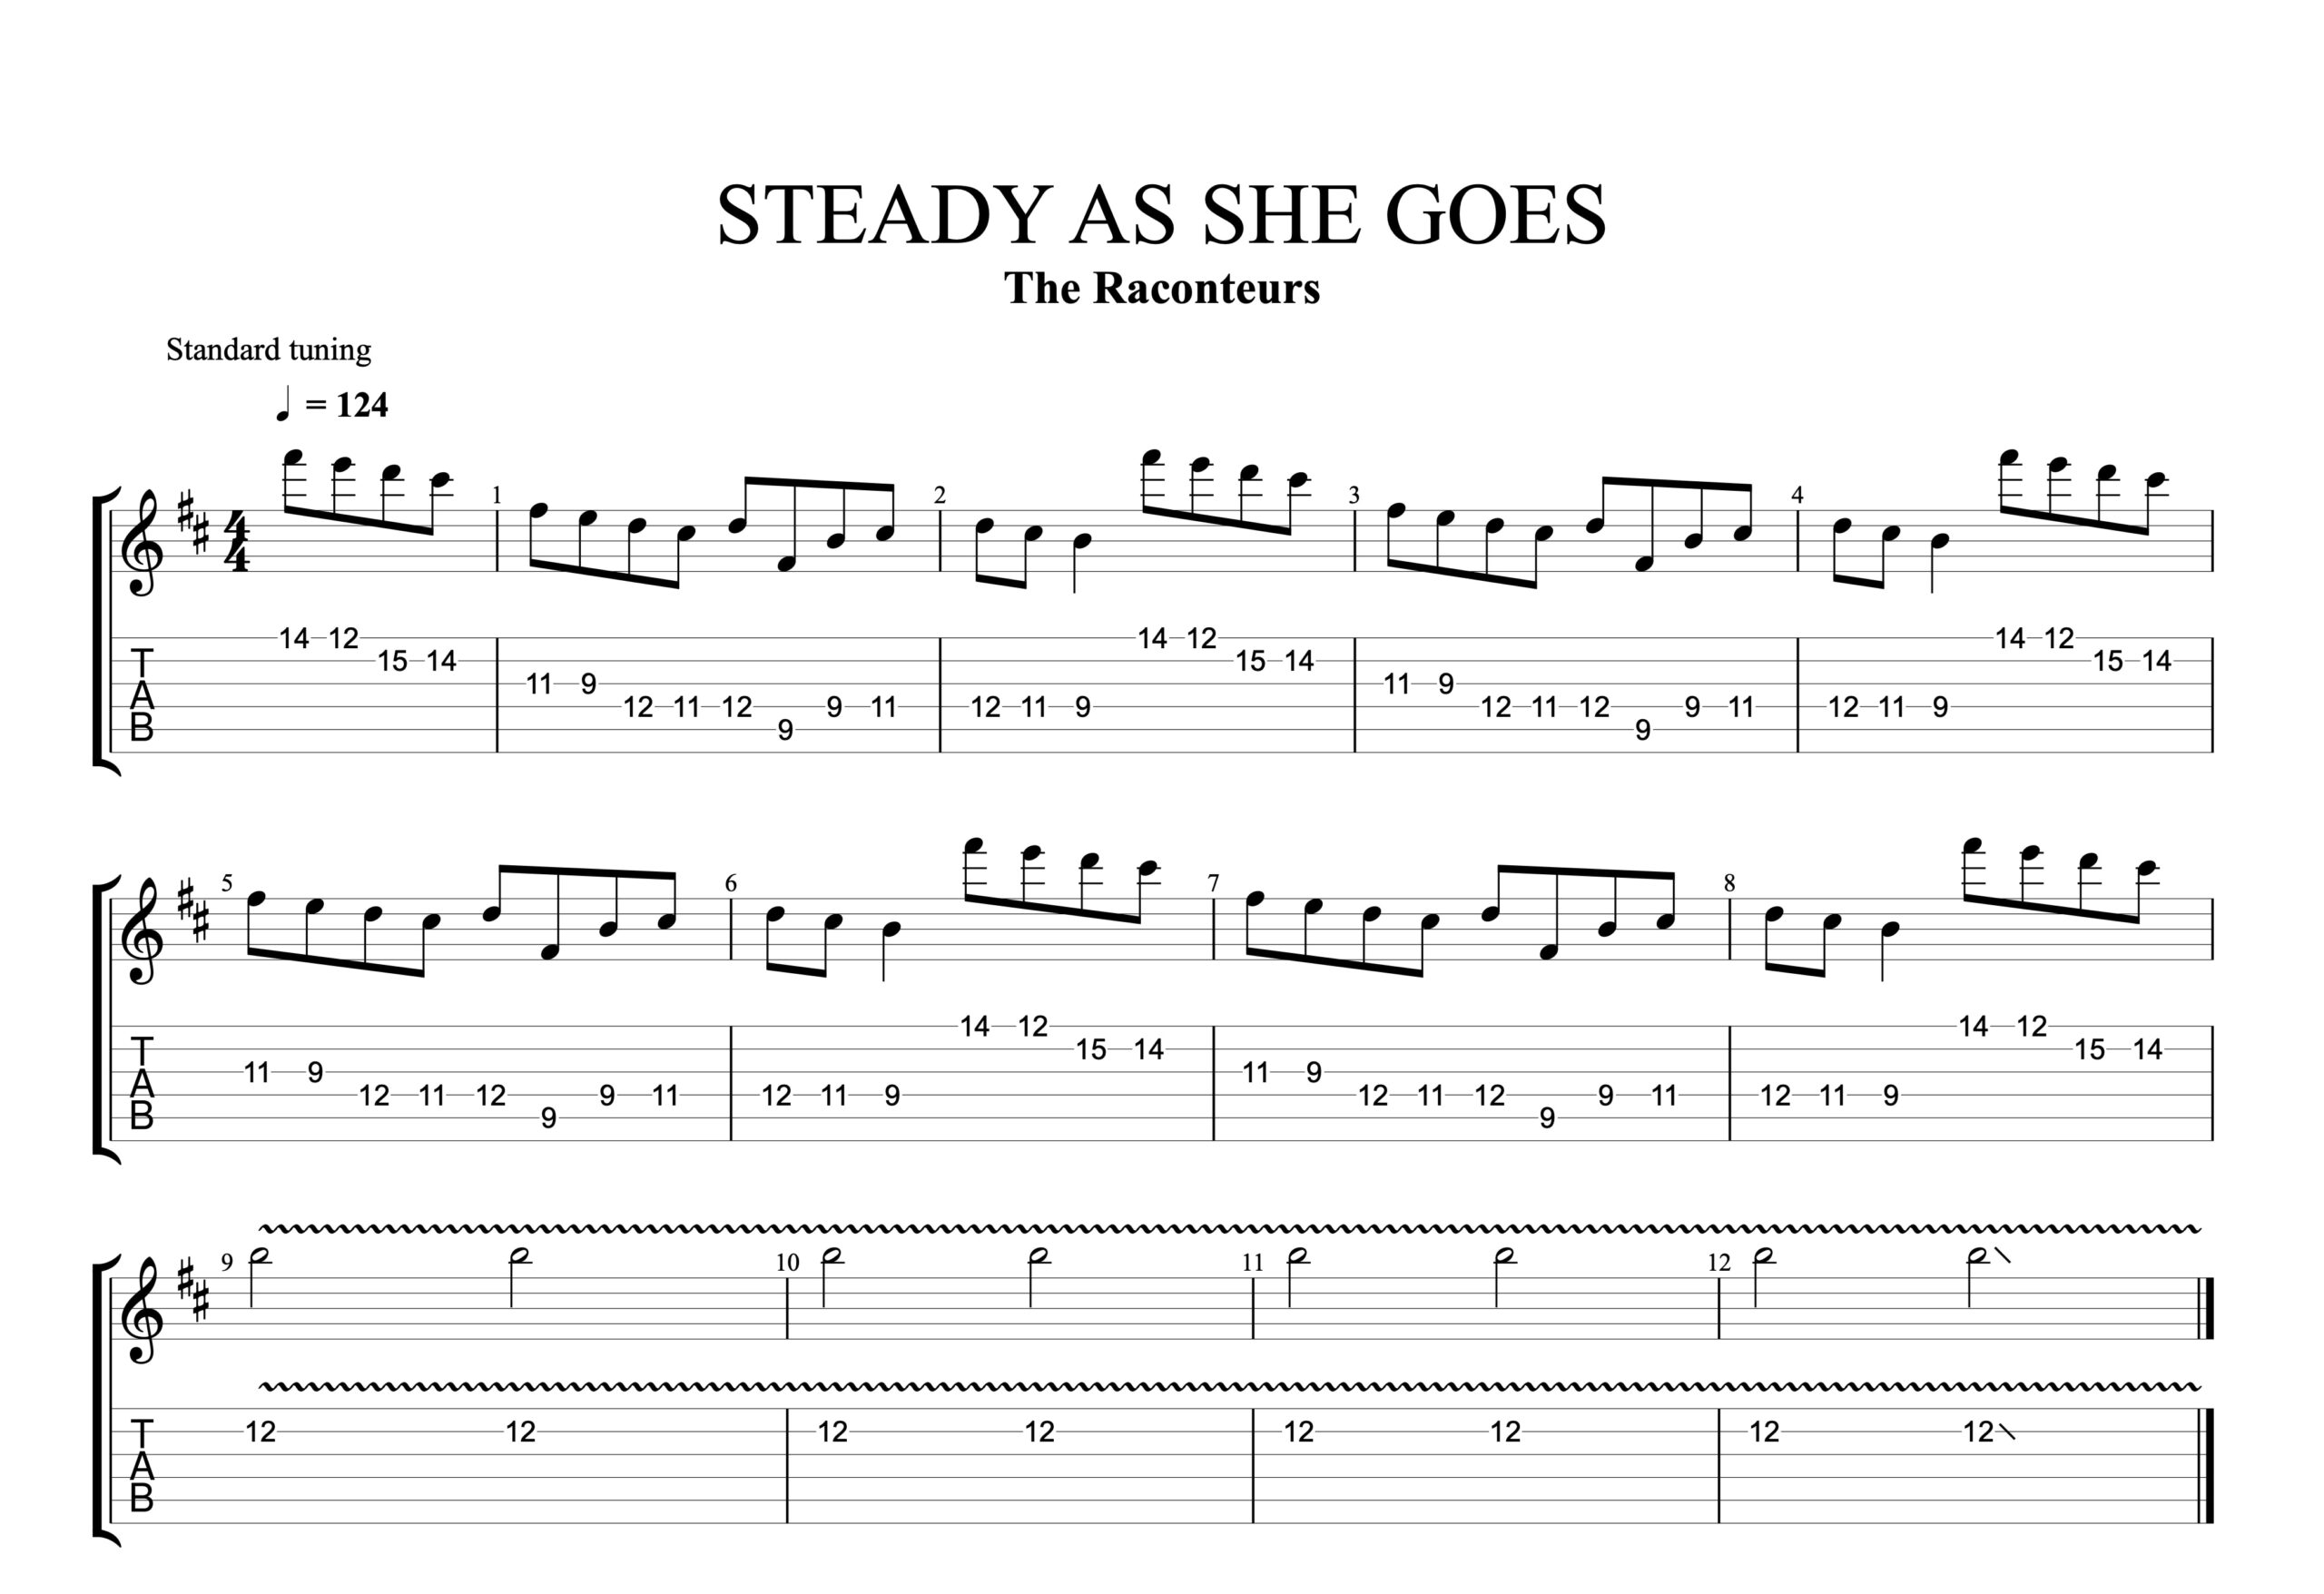 https://blog.guitar-pro.com/wp-content/uploads/2023/02/Steady-As-She-Goes-tab-scaled.jpg